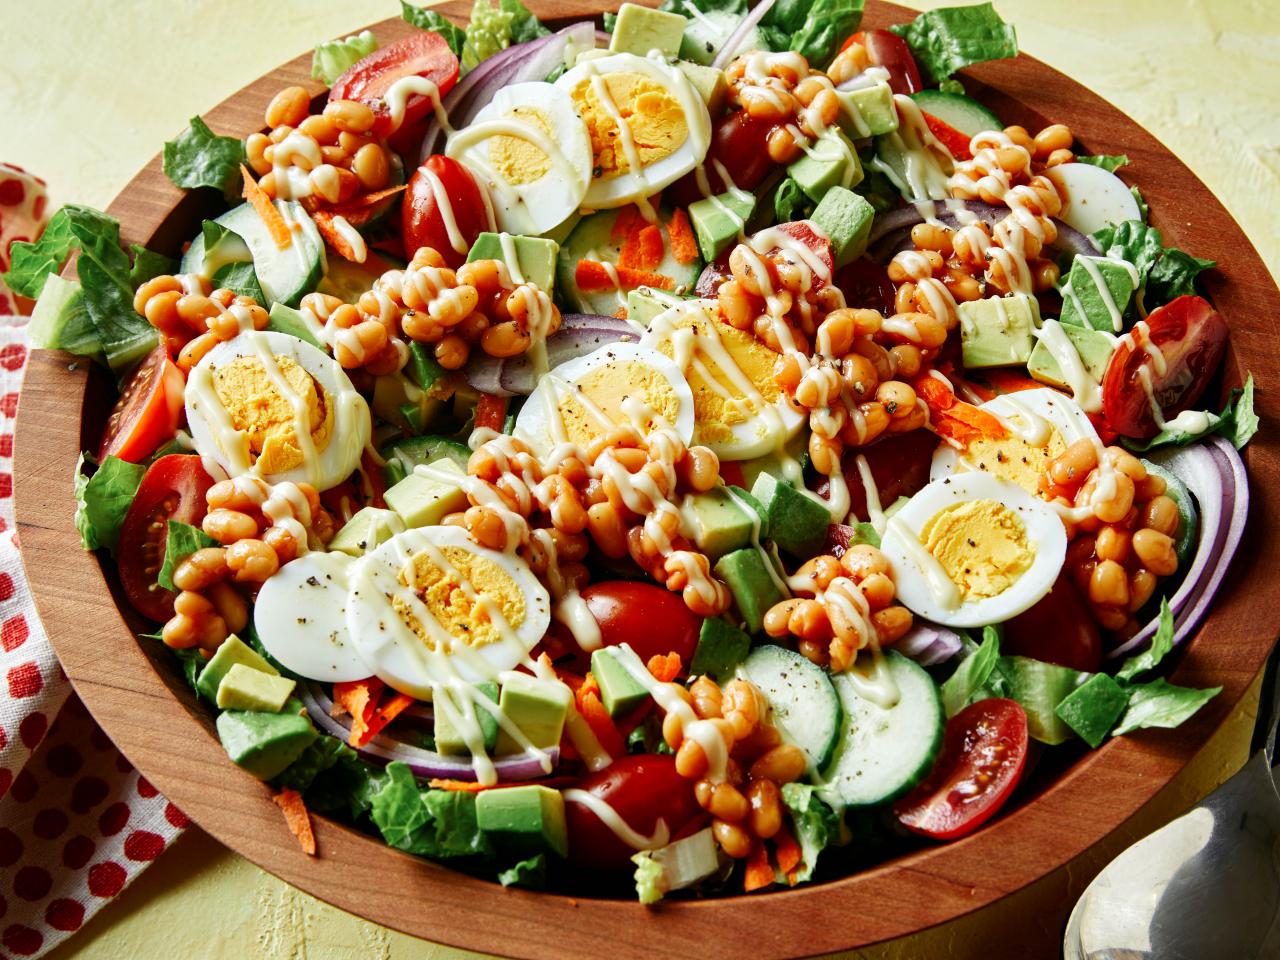 places to have good healthy salads